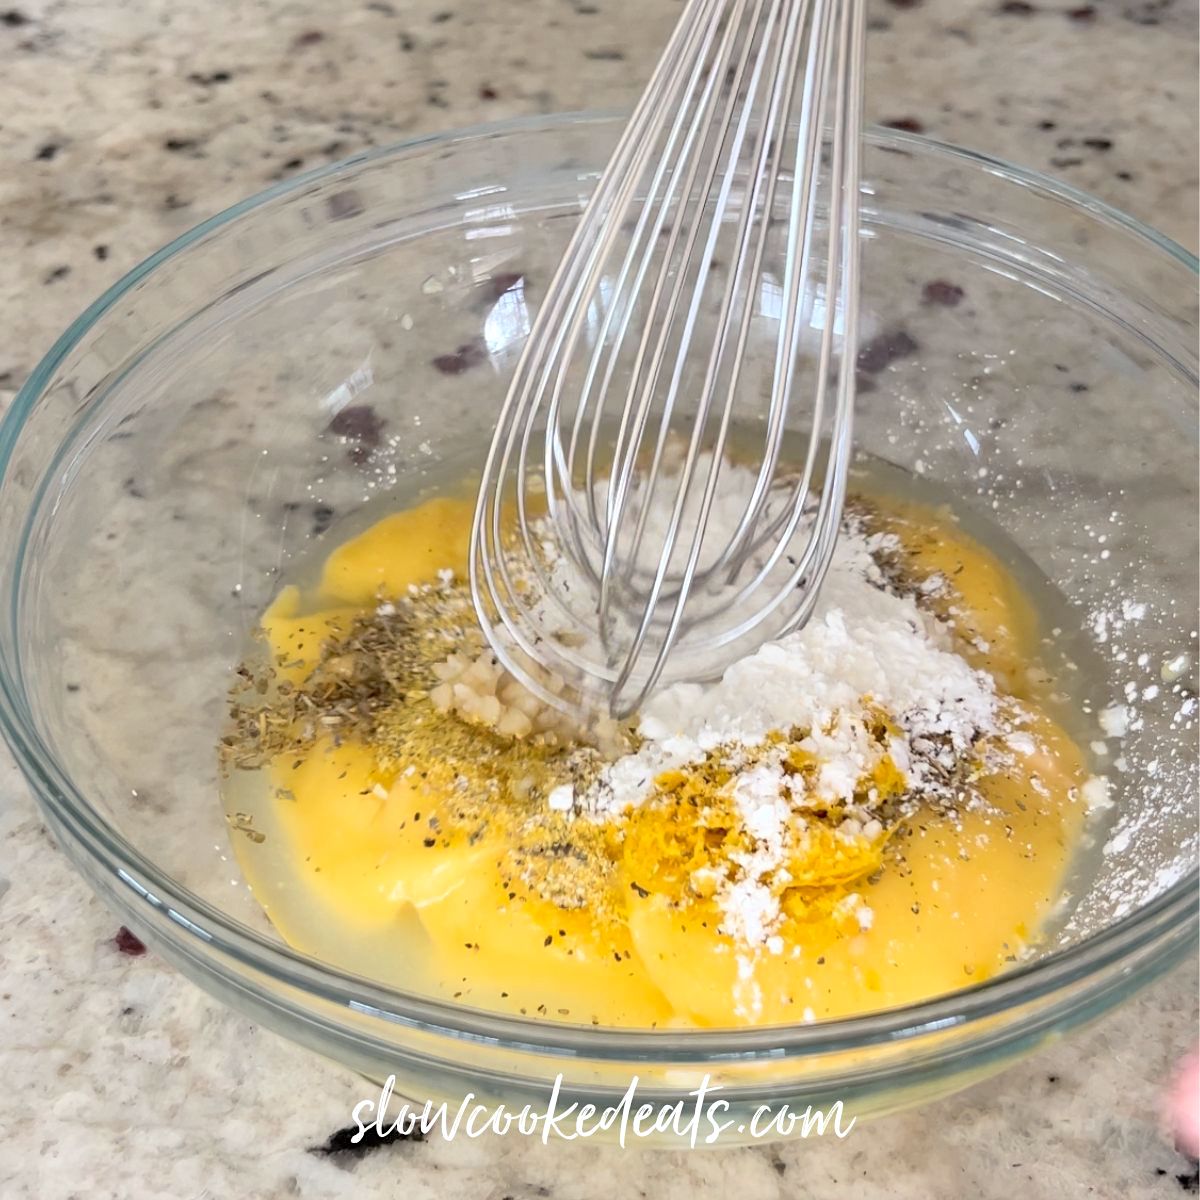 Mixing the lemon sauce in a small clear bowl.